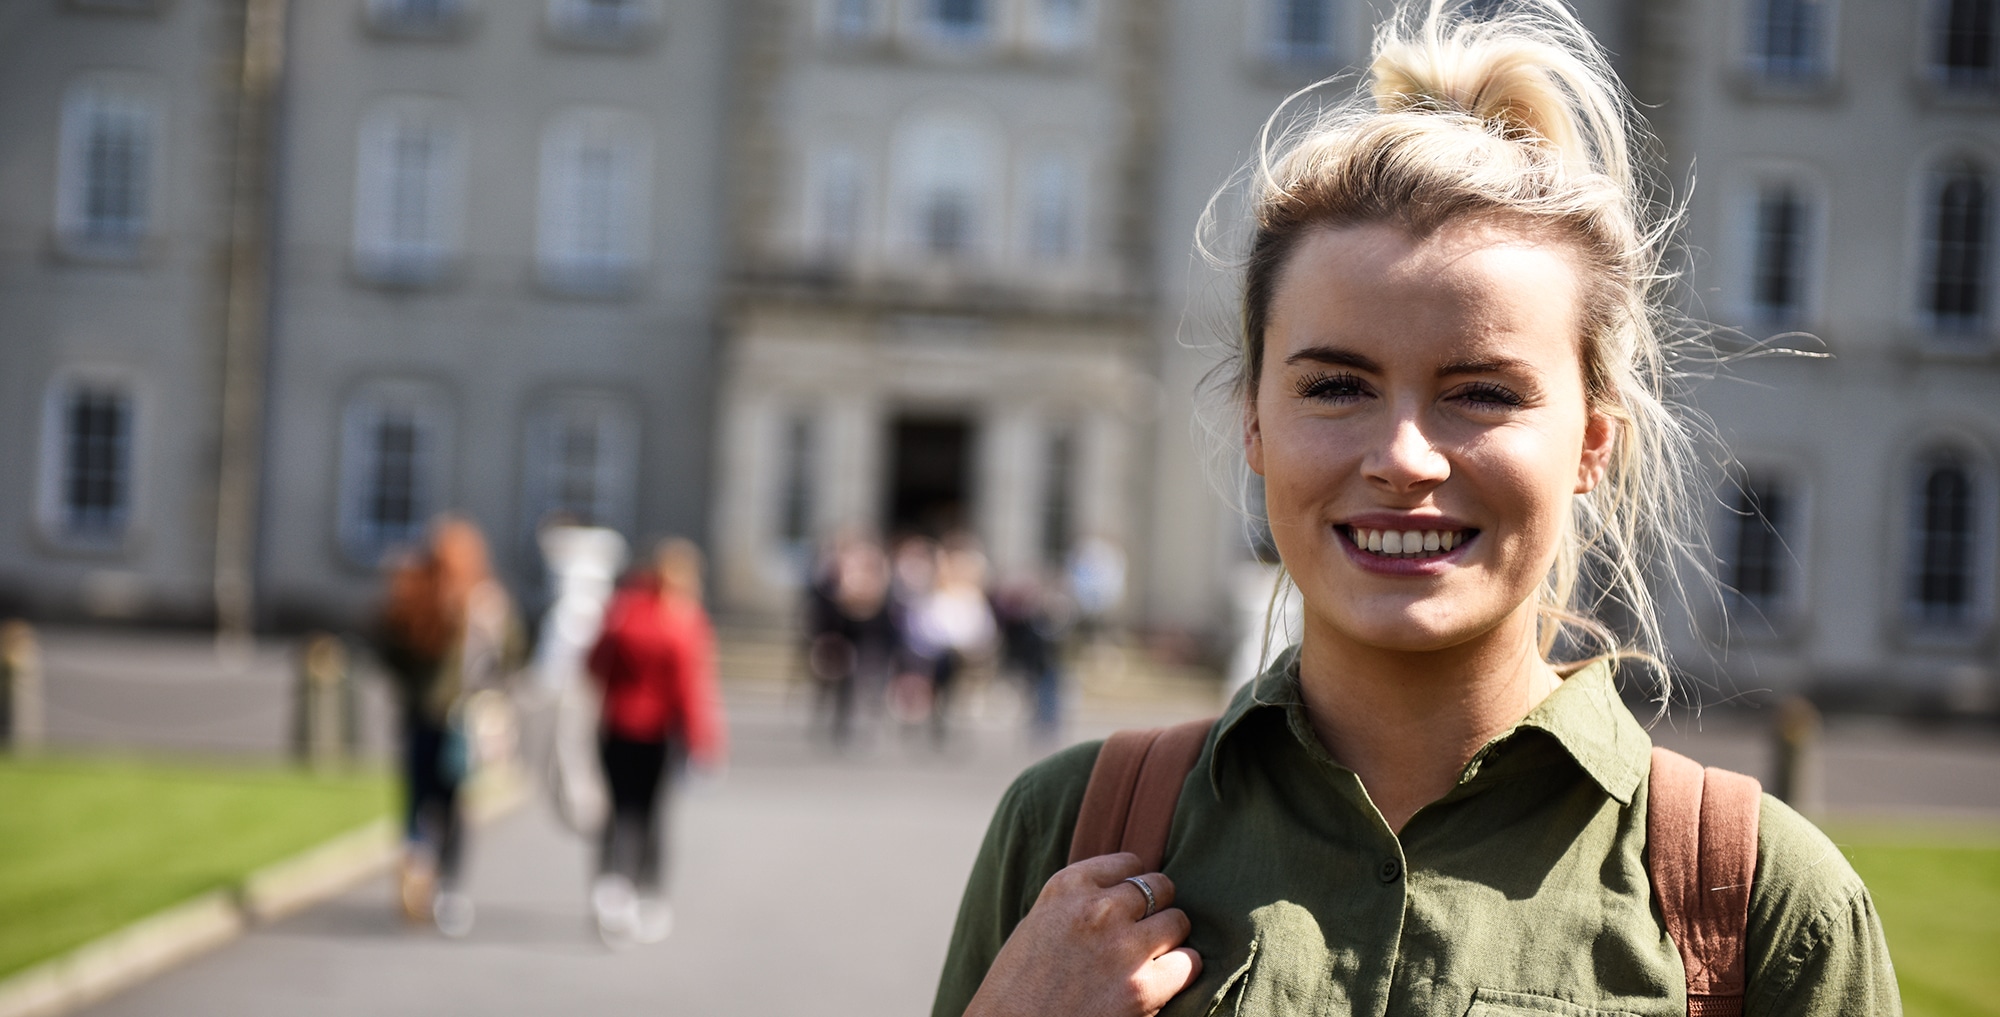 Returning To Campus - Carlow College